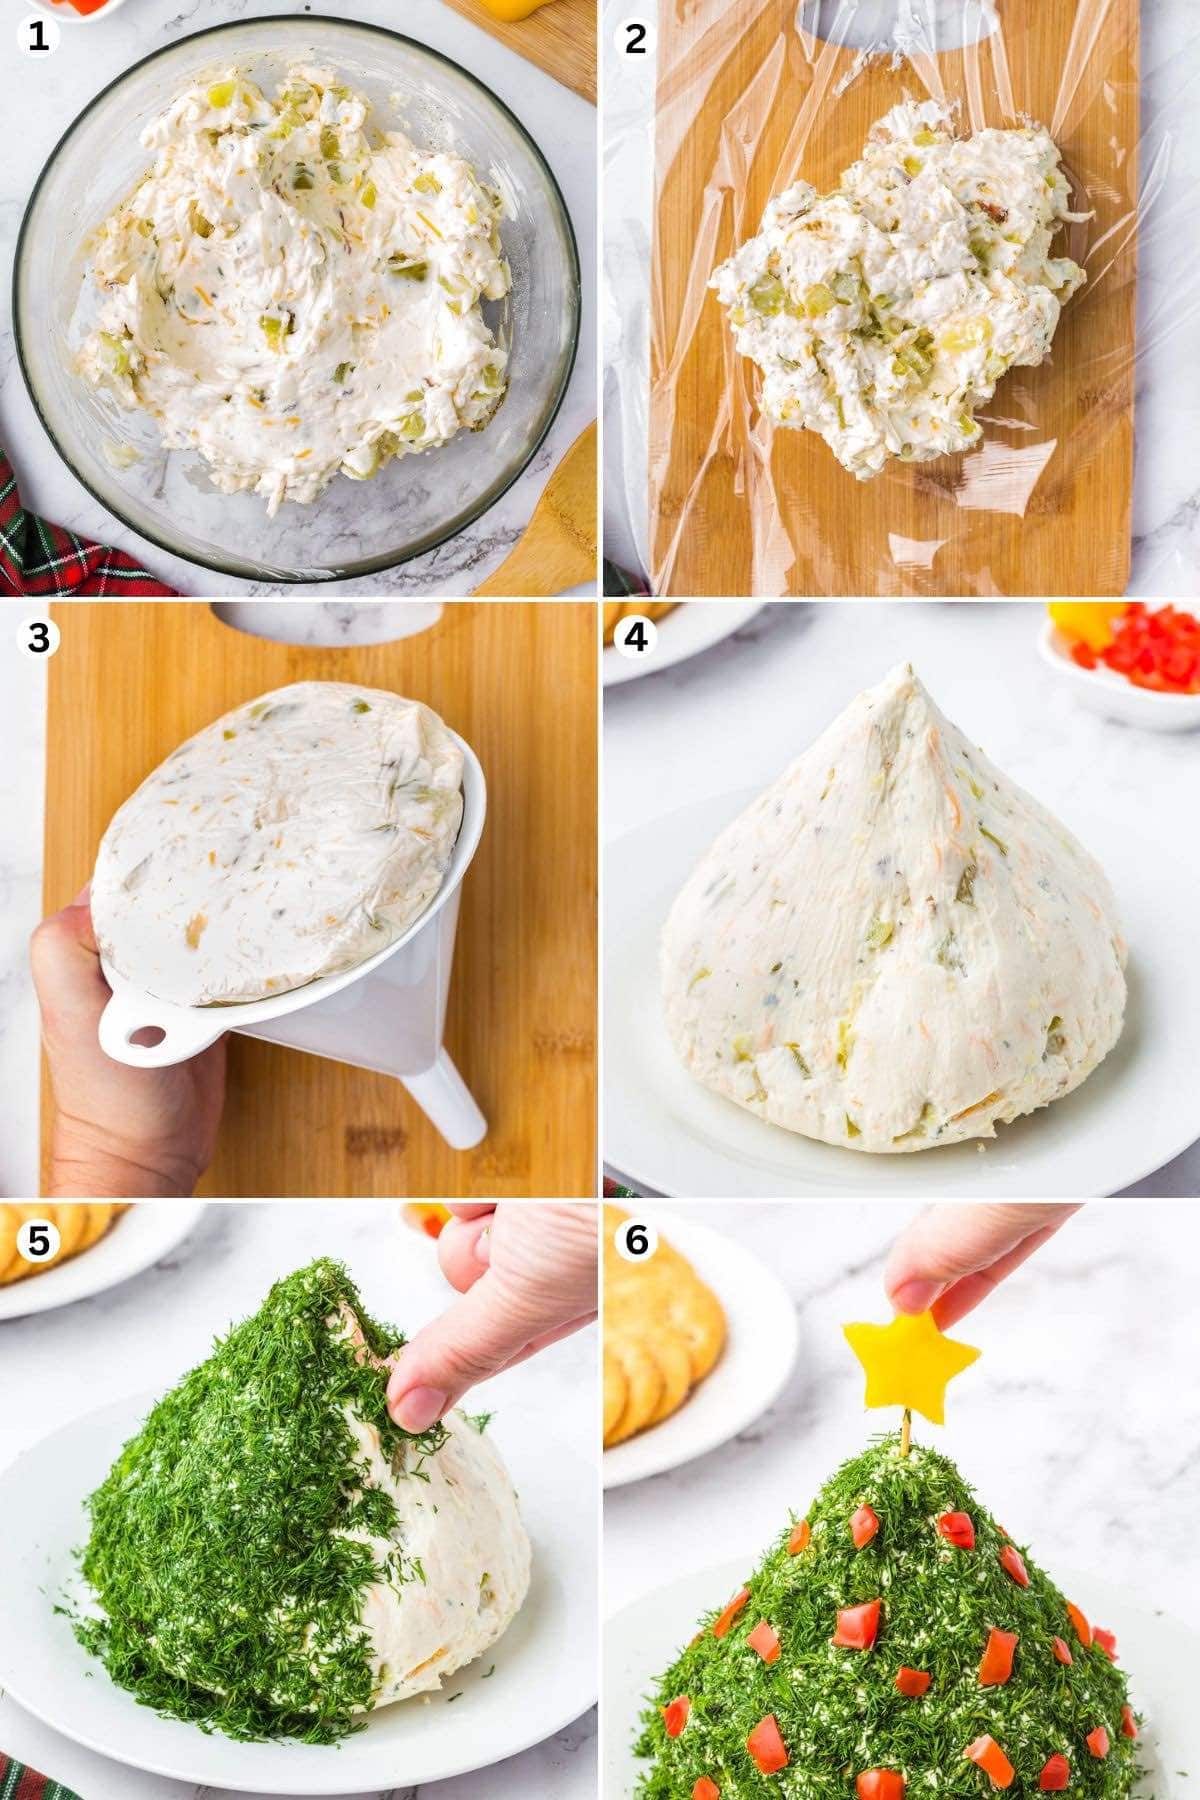 cheese ball mixture in a bowl. wrap in plastic wrap and place inside a cone. decorate with chopped dill and place a star on top. 